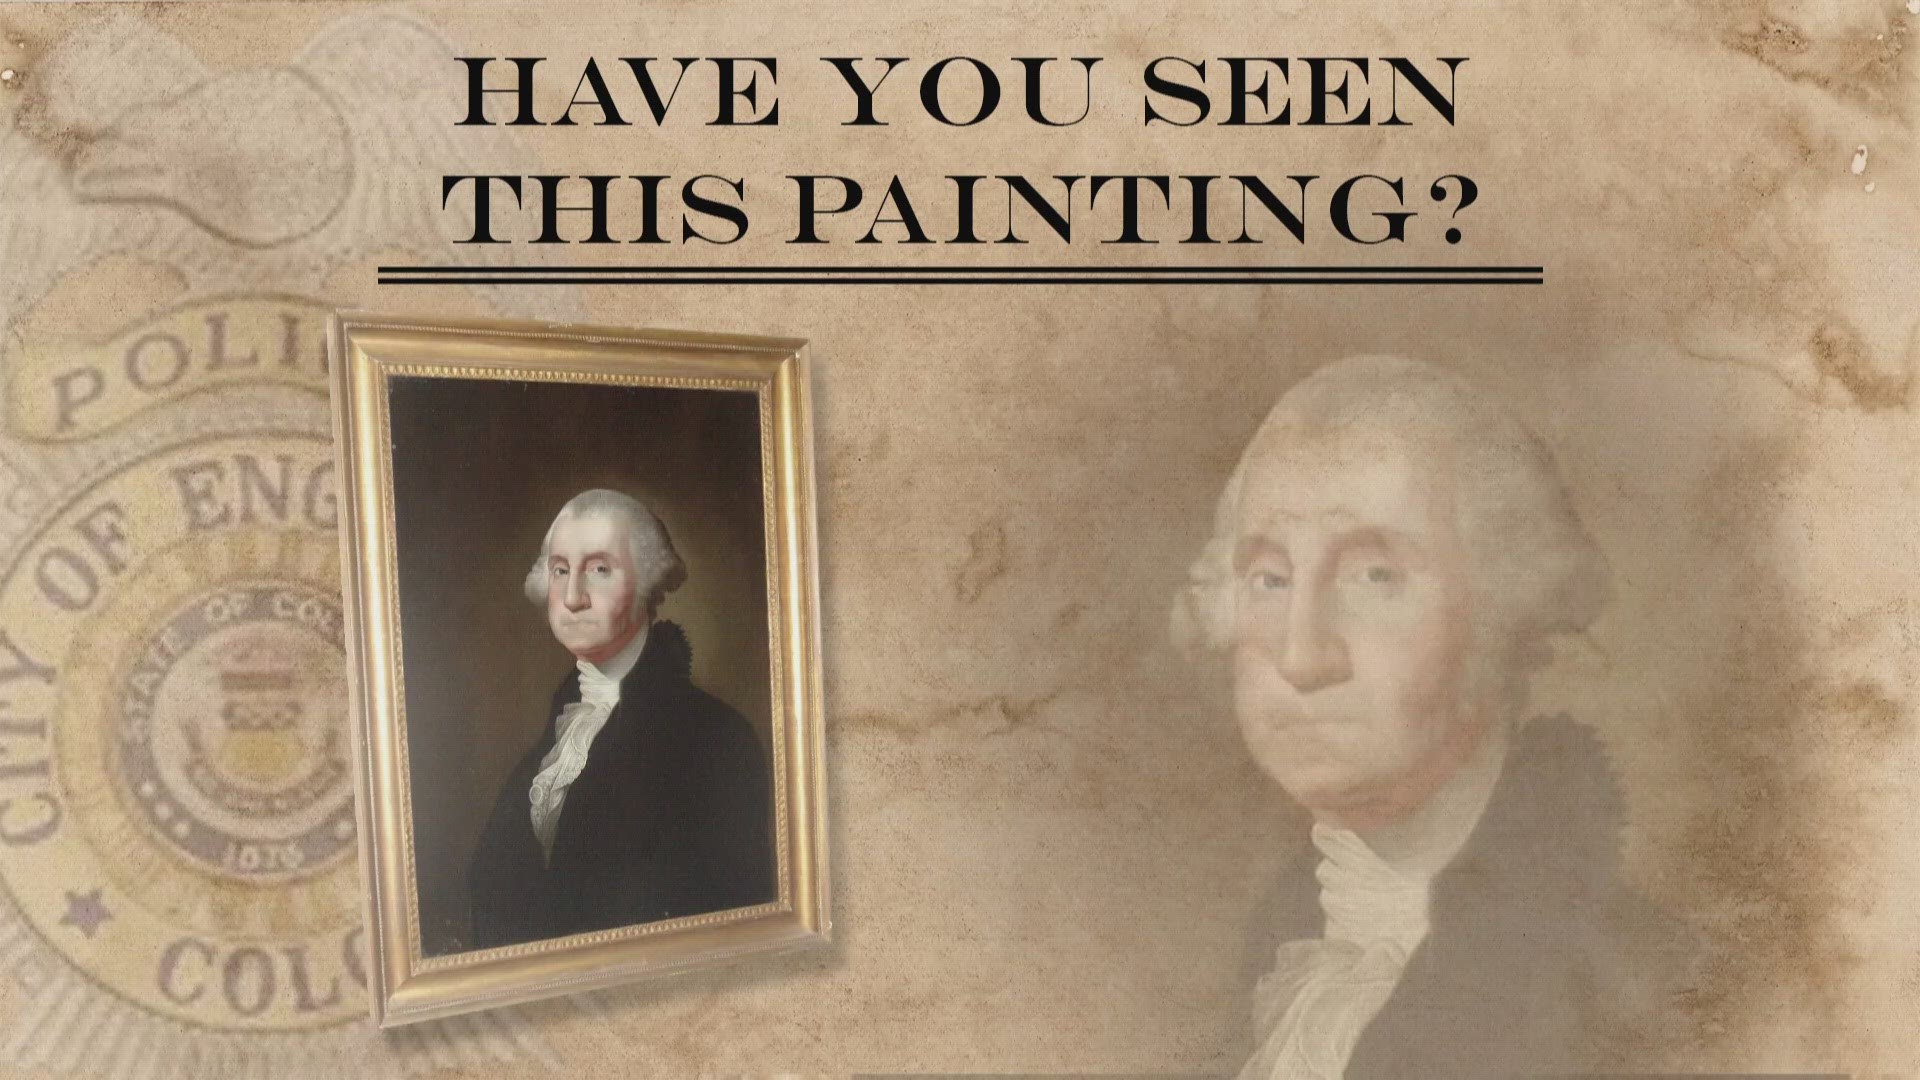 It's believed the painting was stolen on Jan. 10, but the theft wasn't discovered right away.